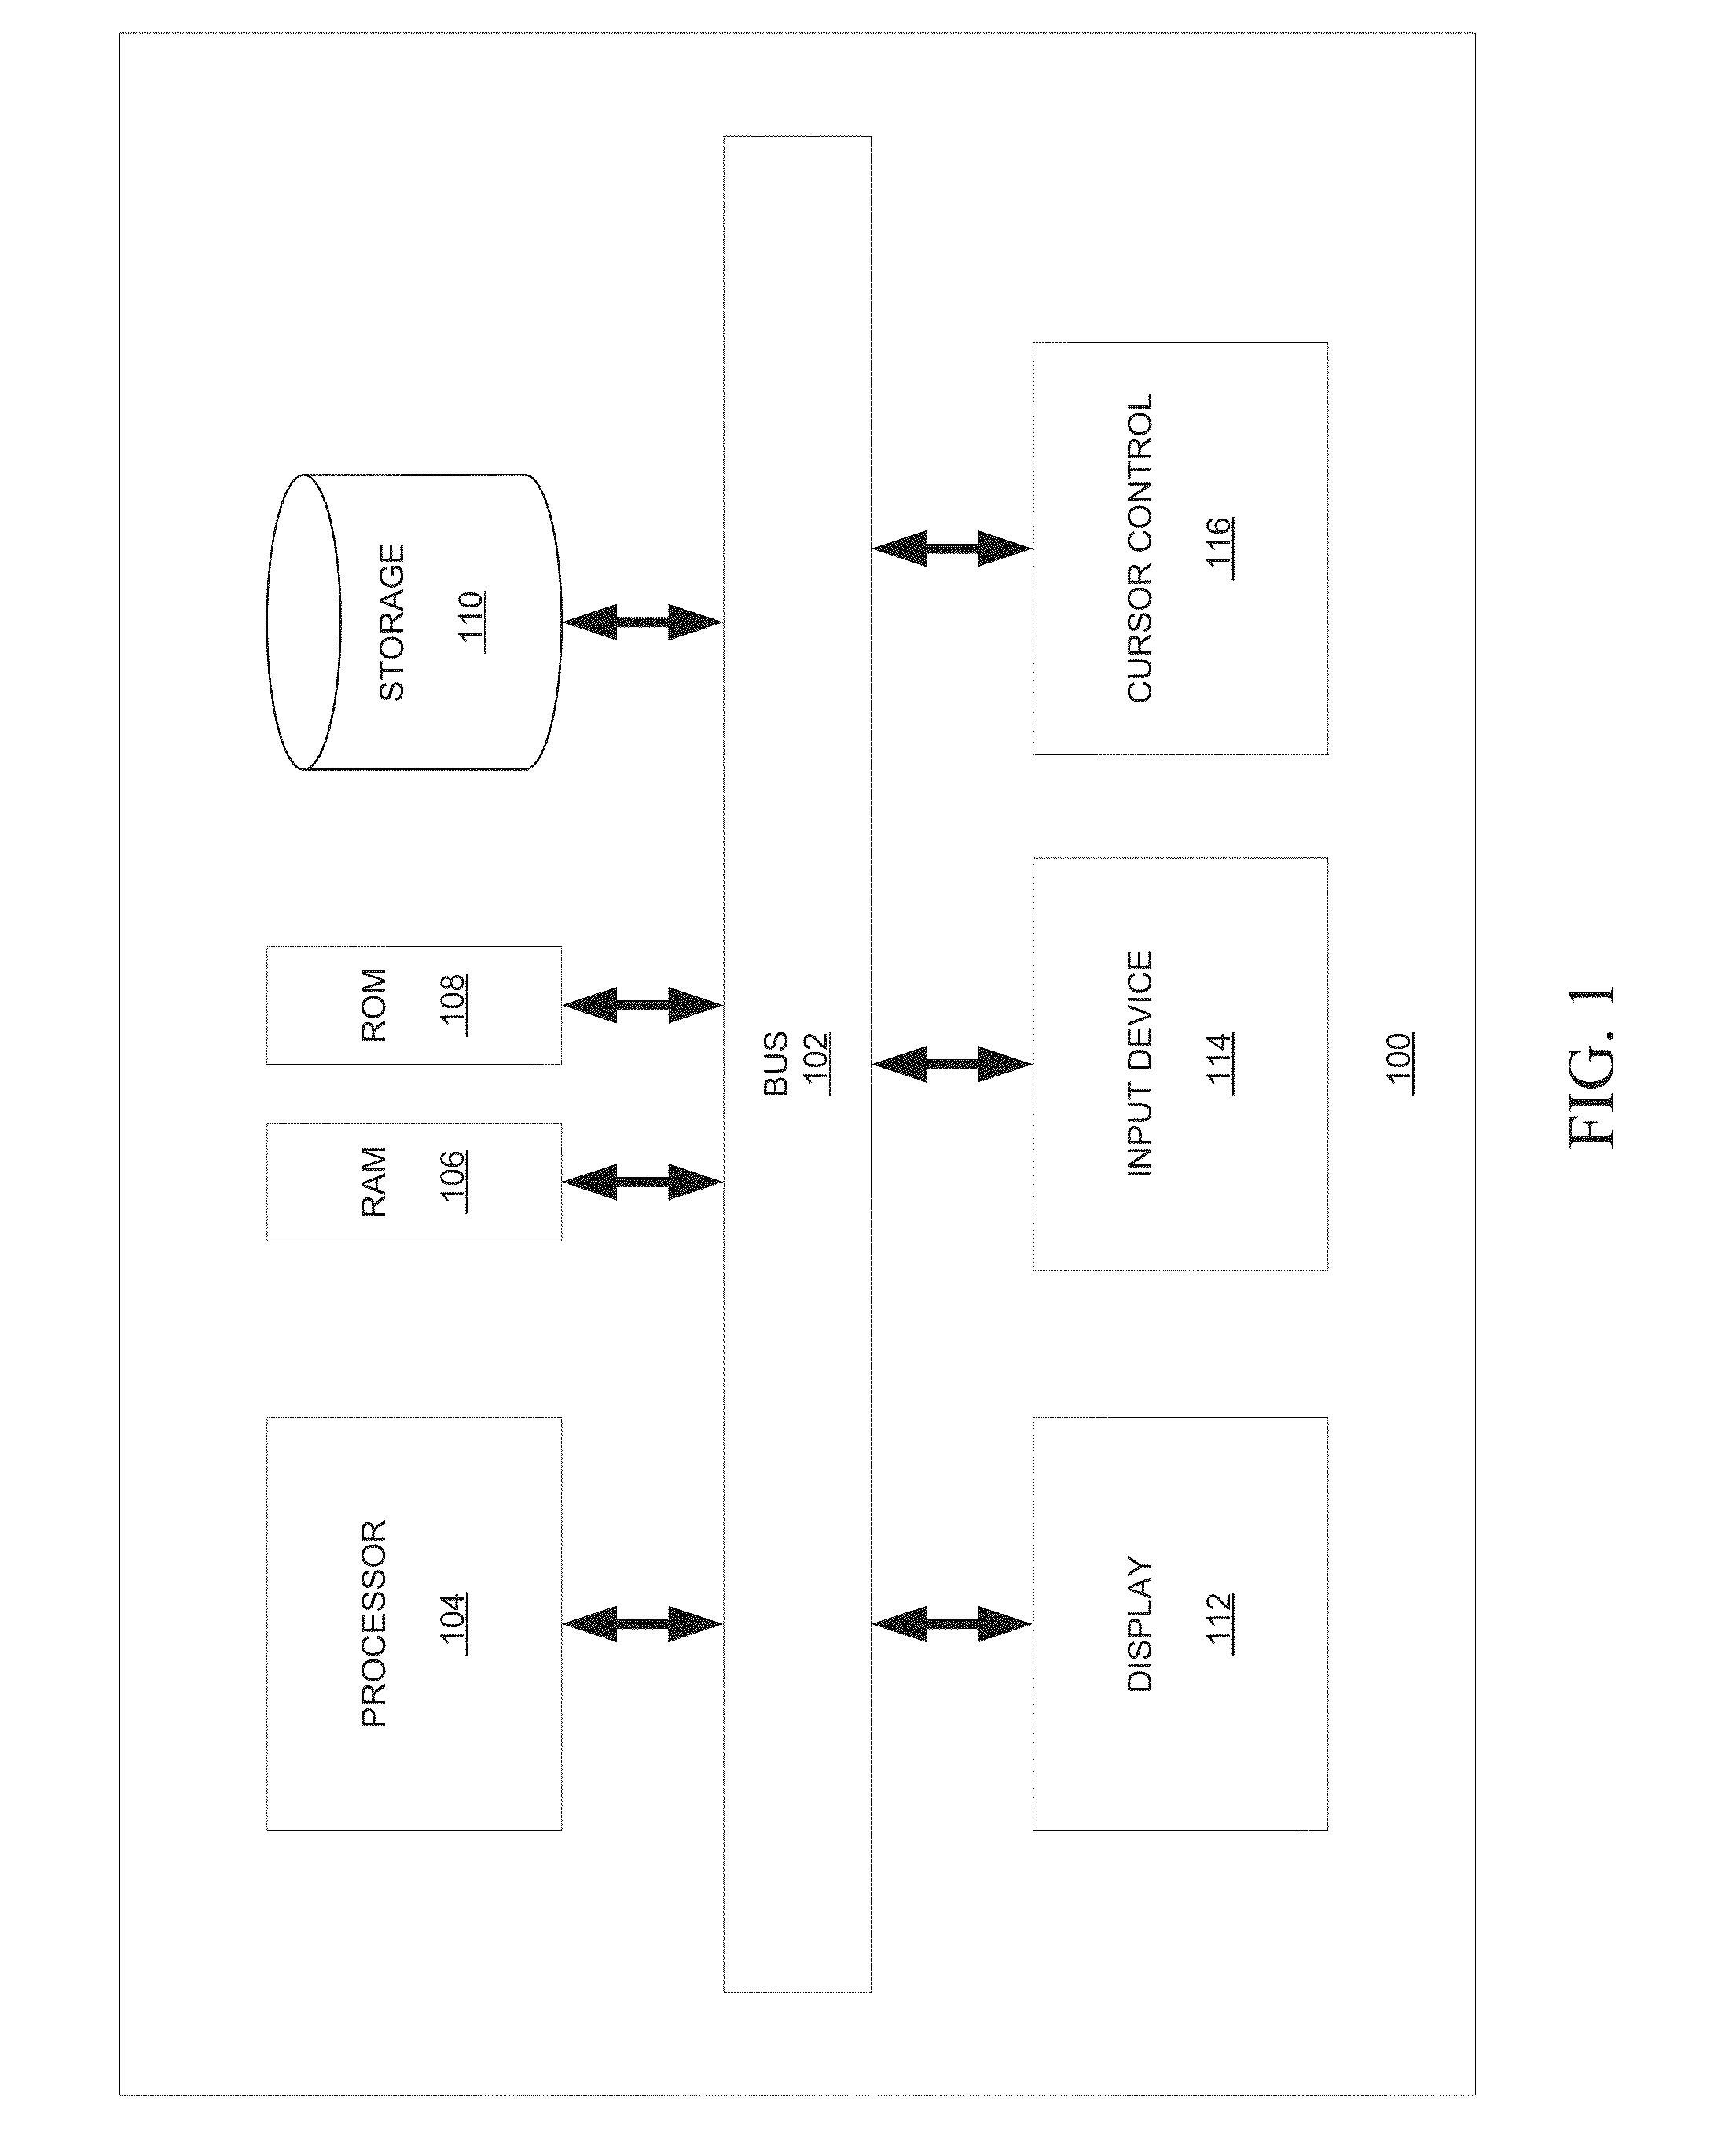 Systems and Methods for Analysis and Interpretation of Nucleic Acid Sequence Data